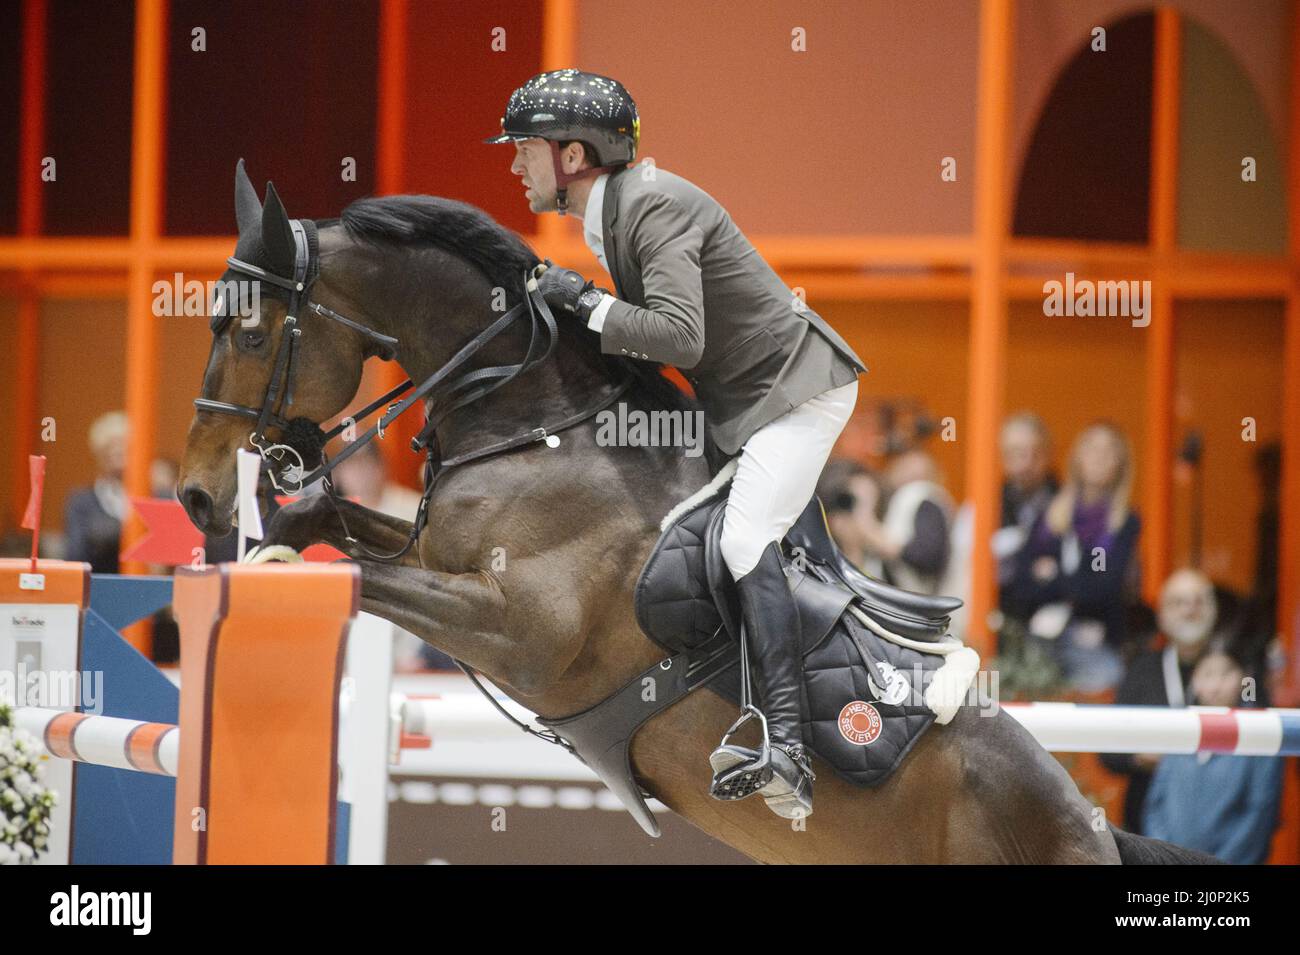 Simon DELESTRE (FRA) riding CAYMAN JOLLY JUMPER during the Saut Hermes prize at the Saut-Hermes 2022, equestrian FEI event on March 19, 2022 at the ephemeral Grand-palais in Paris, France - Photo Christophe Bricot / DPPI Stock Photo